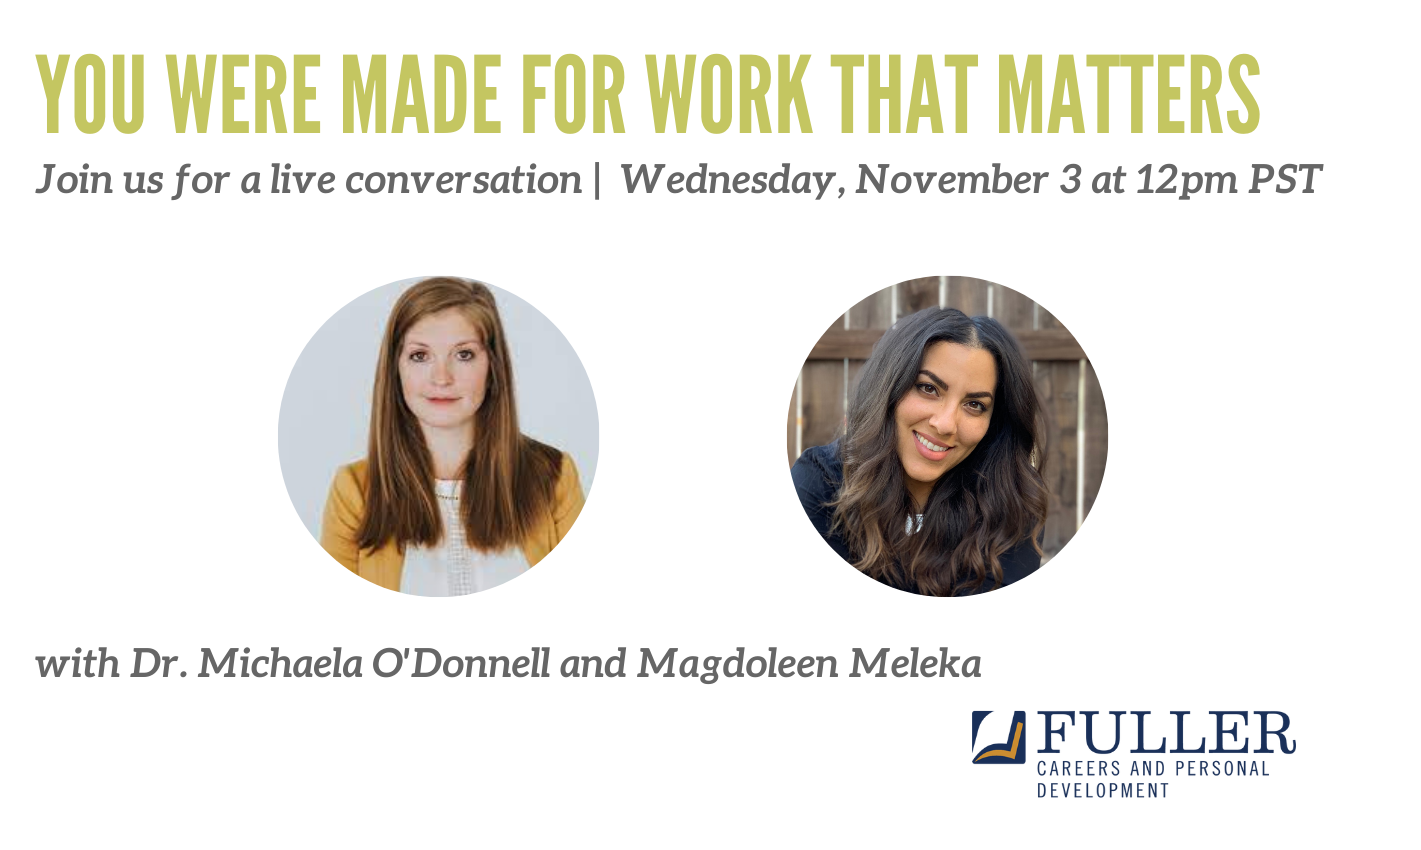 Webinar: Pursuing Meaningful Work in a Changing World